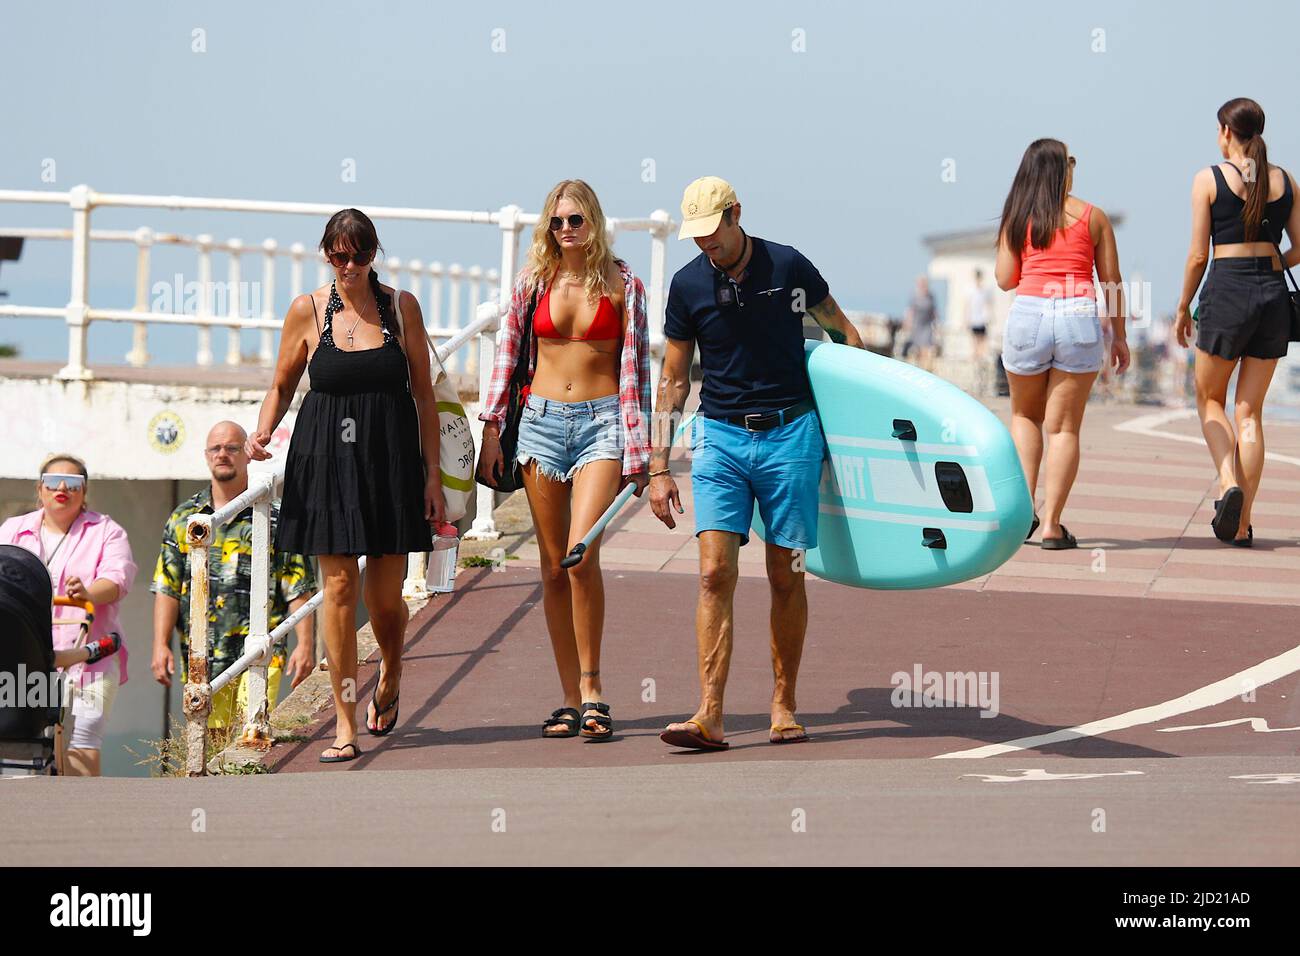 Hastings, East Sussex, UK. 17 Jun, 2022. UK Weather: Very hot and sunny at the seaside town of Hastings in East Sussex as Brits enjoy the very hot weather today that is expected to reach 34c in some parts of the UK. Photo Credit: Paul Lawrenson /Alamy Live News Stock Photo